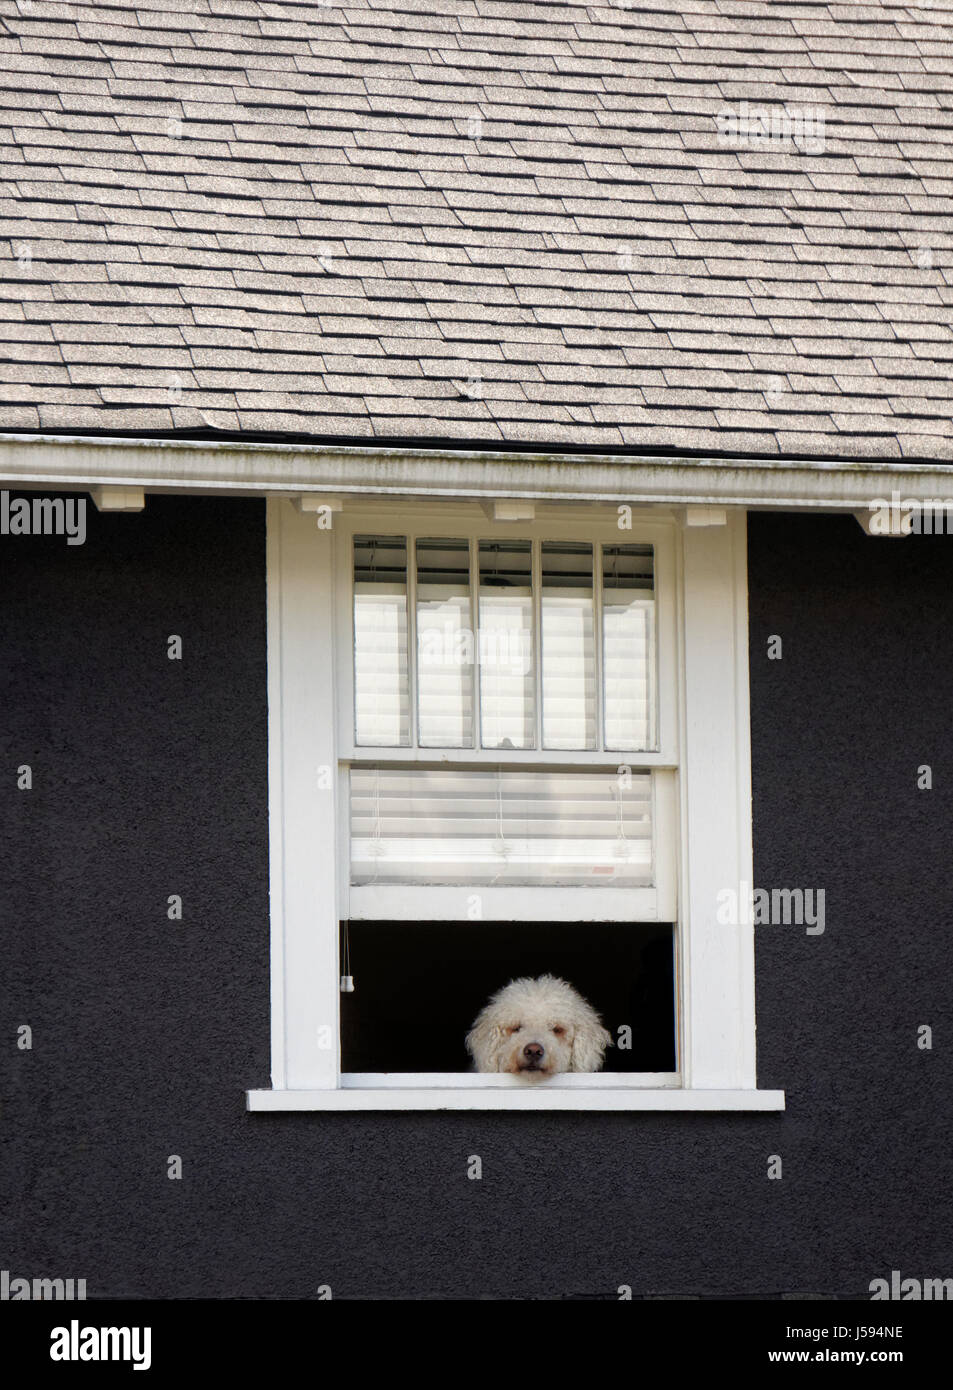 Bored-looking shaggy white dog peering out of the upstairs open window of a house Stock Photo